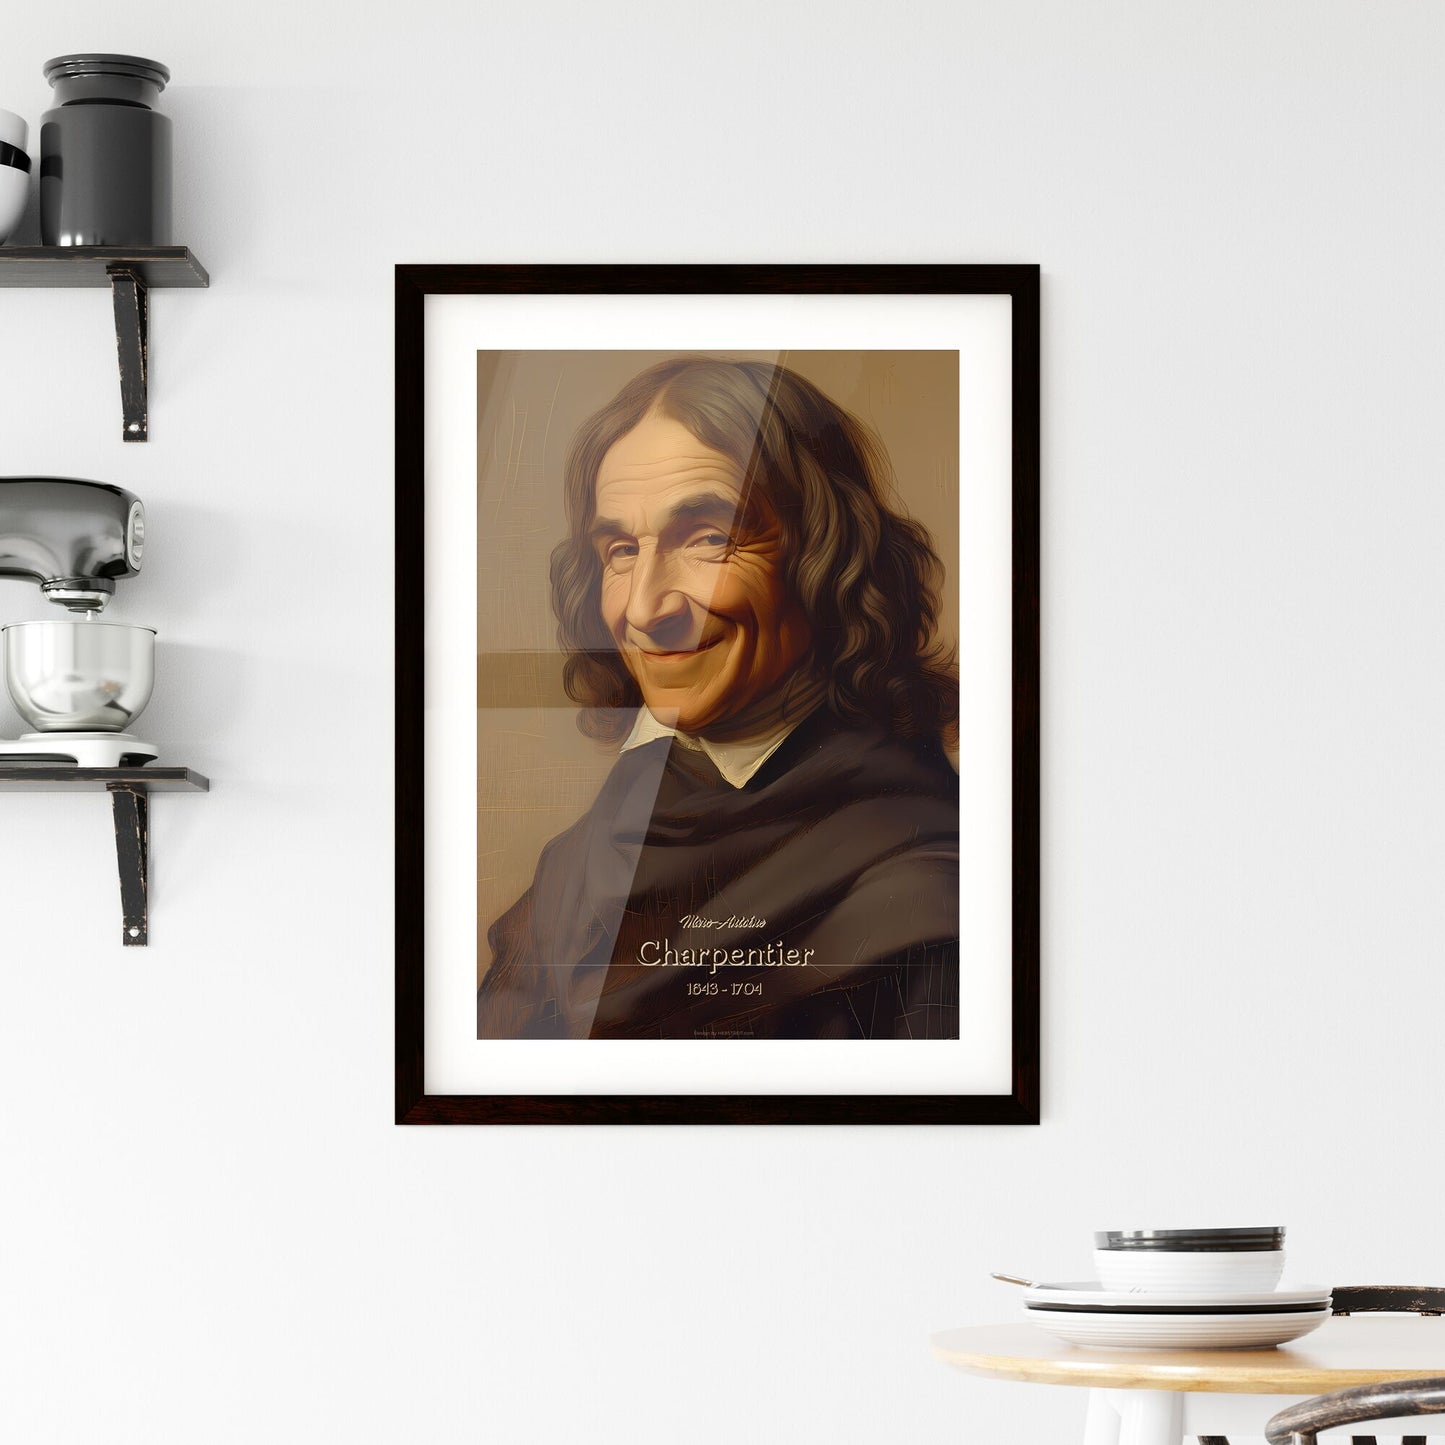 Marc-Antoine, Charpentier, 1643 - 1704, A Poster of a man with long hair wearing a black robe Default Title